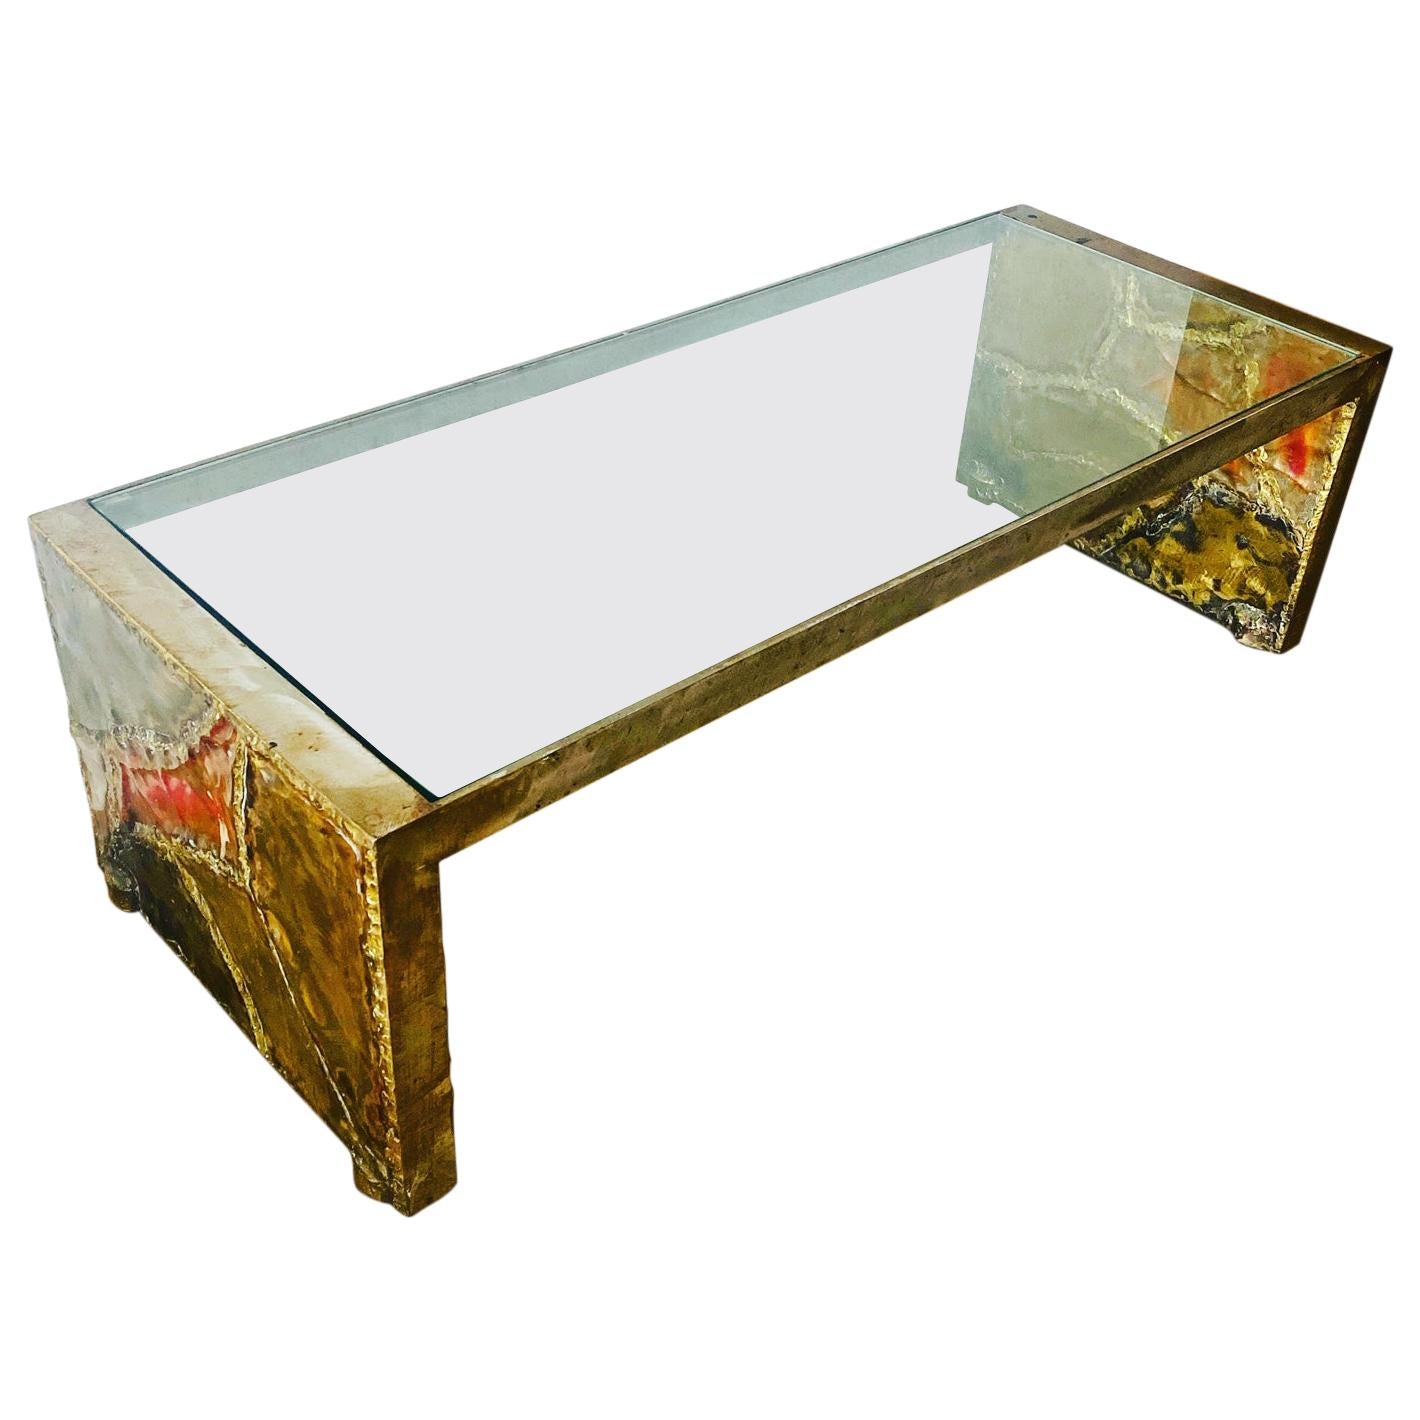 Silas Seandel Brutalist Modern Coffee Table in Mixed Metal and Glass For Sale